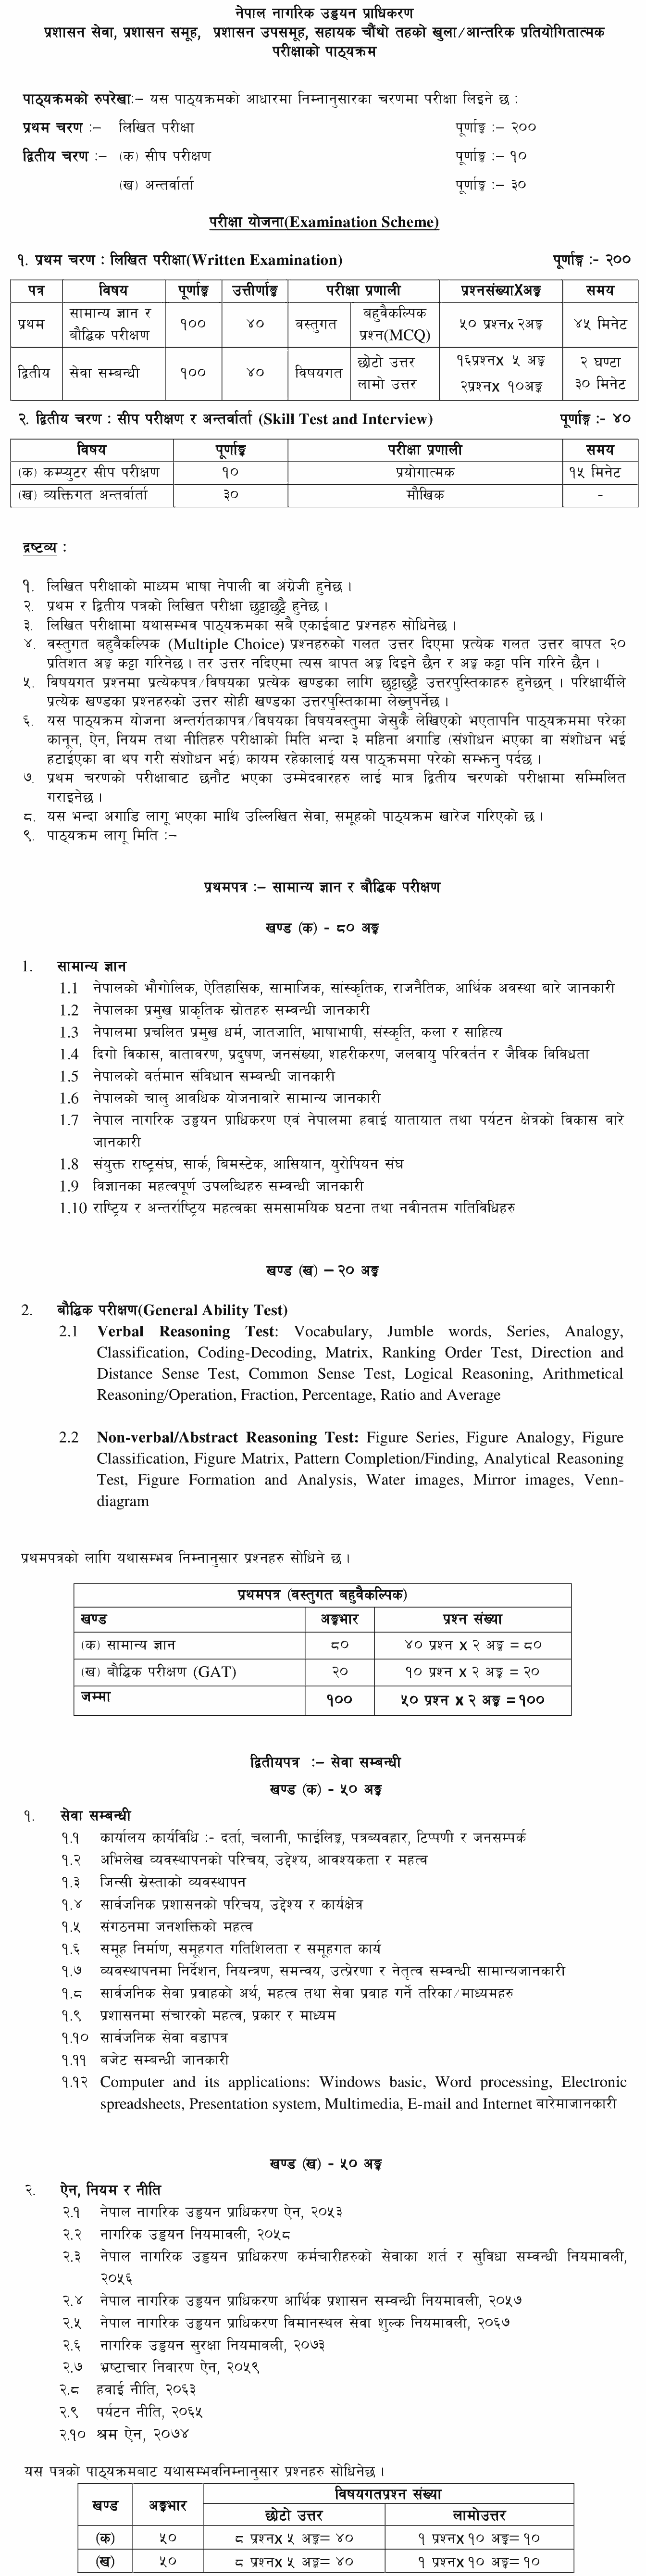 Civil Aviation Authority of Nepal 4th Level Administration Service Syllabus